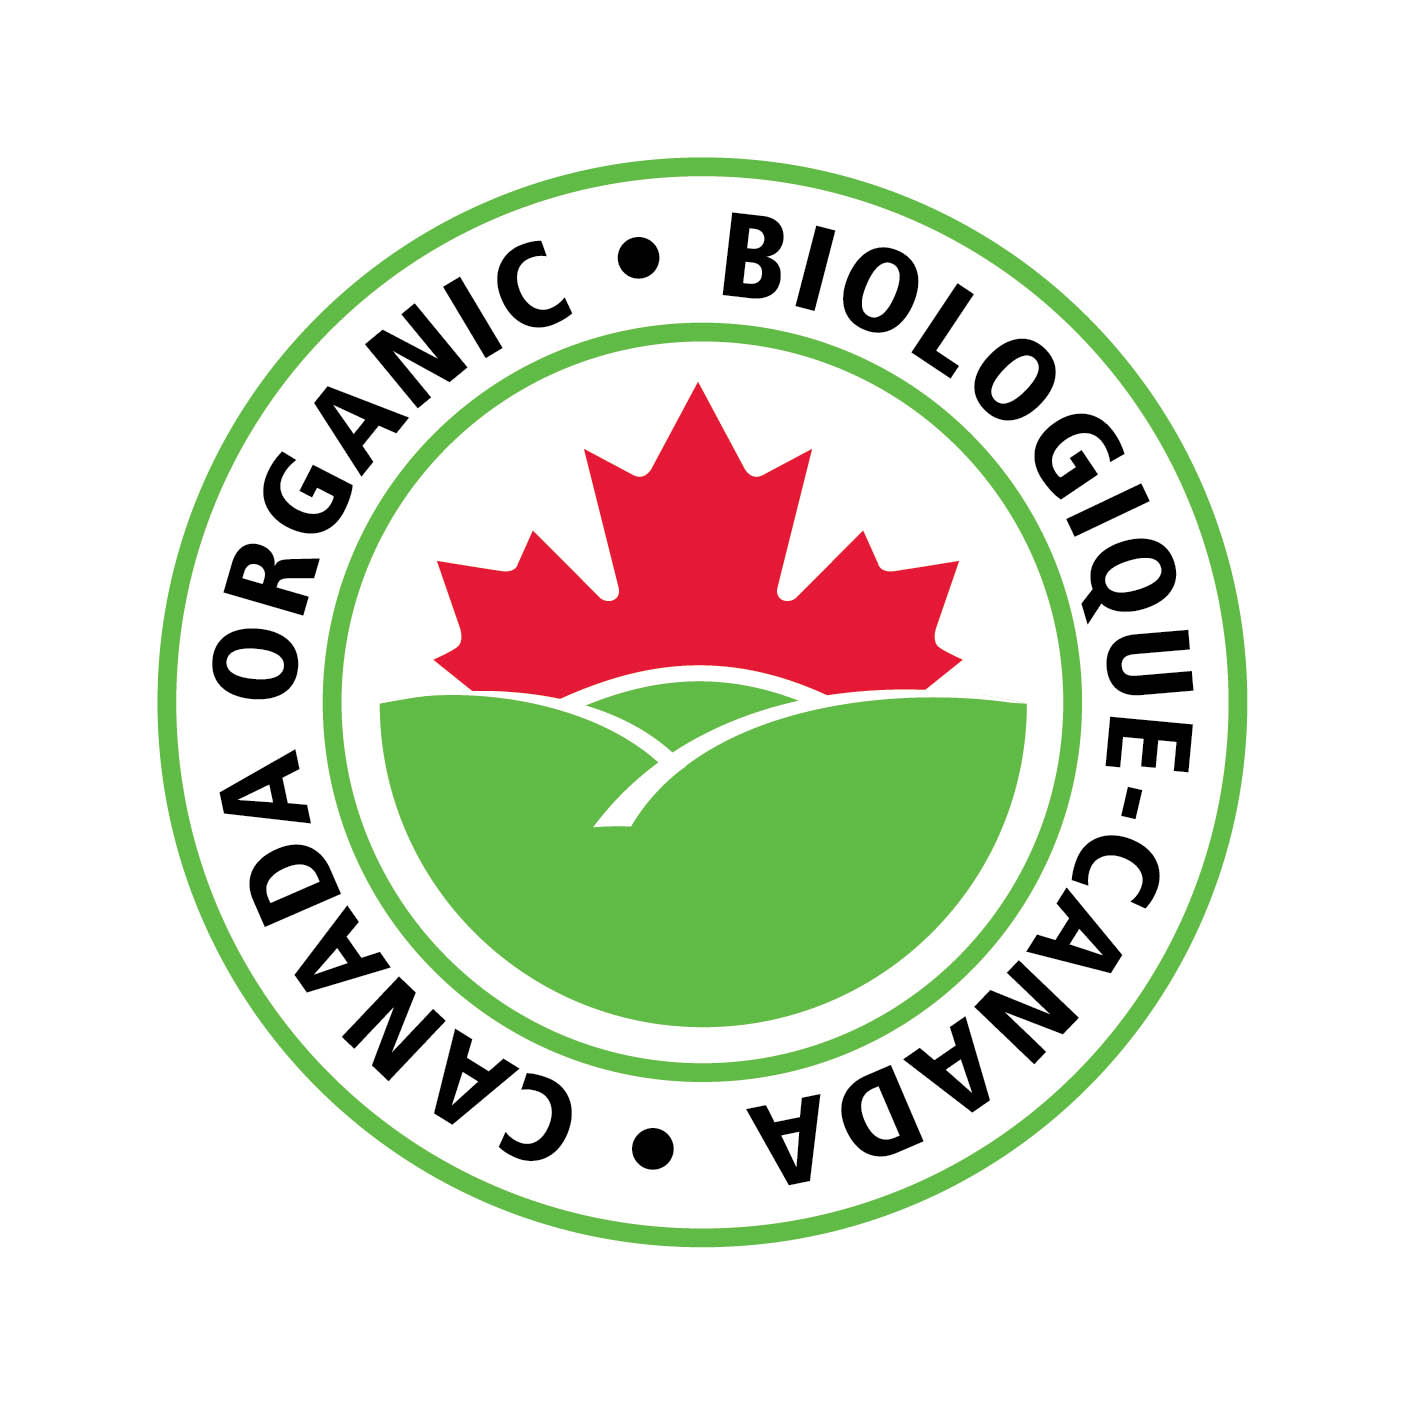 Canada organic logo. Circle with stylized fields and maple leaf in back with the words Canada Organic and Biologique Canada around it.